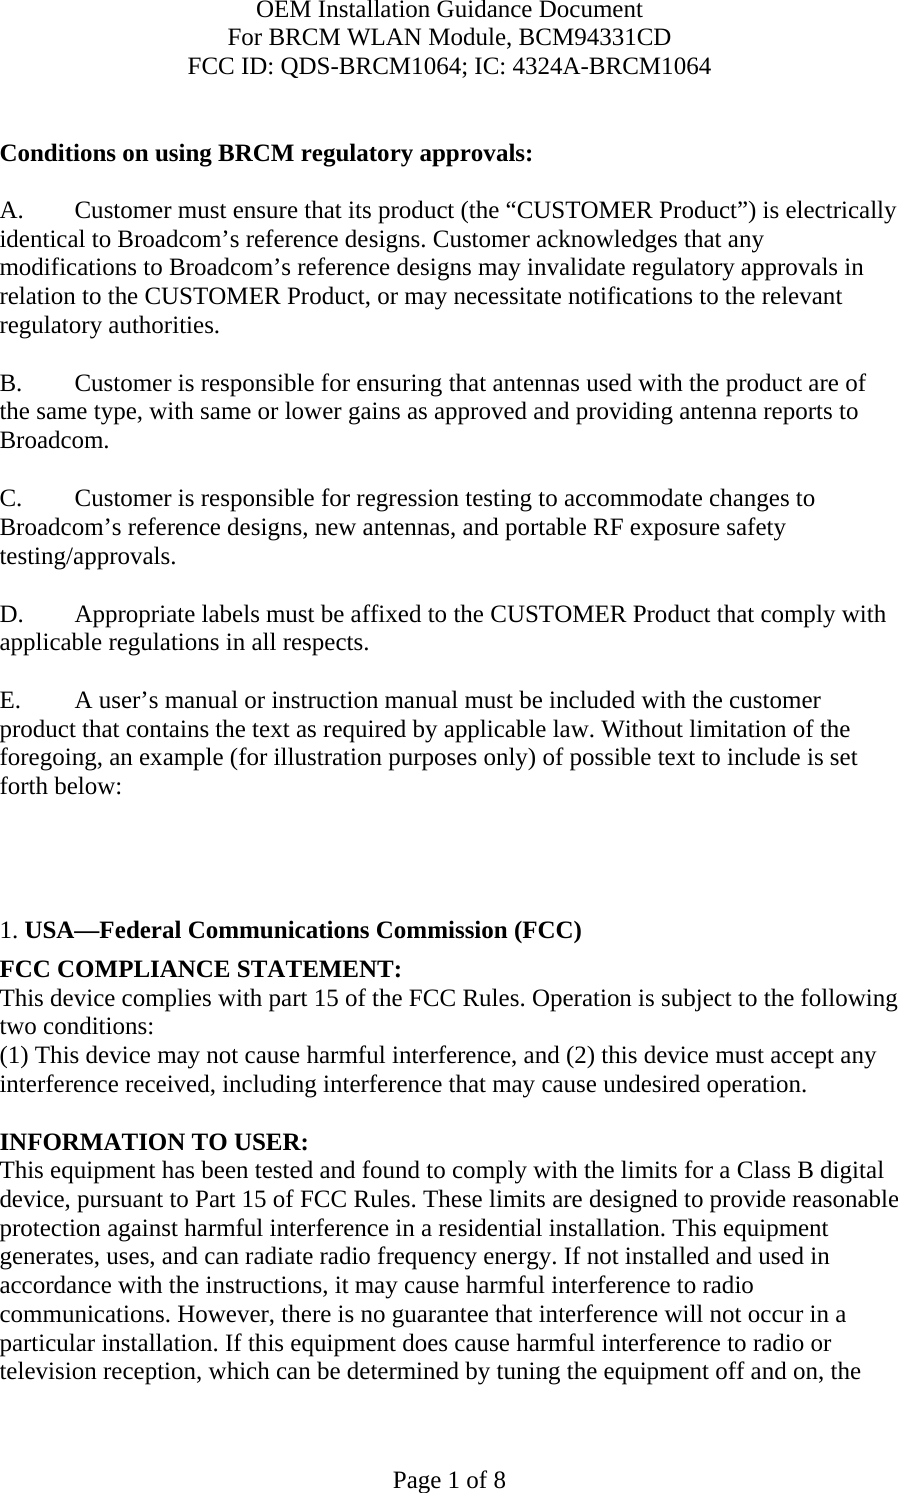 OEM Installation Guidance Document For BRCM WLAN Module, BCM94331CD FCC ID: QDS-BRCM1064; IC: 4324A-BRCM1064  Page 1 of 8  Conditions on using BRCM regulatory approvals:   A.  Customer must ensure that its product (the “CUSTOMER Product”) is electrically identical to Broadcom’s reference designs. Customer acknowledges that any modifications to Broadcom’s reference designs may invalidate regulatory approvals in relation to the CUSTOMER Product, or may necessitate notifications to the relevant regulatory authorities.  B.   Customer is responsible for ensuring that antennas used with the product are of the same type, with same or lower gains as approved and providing antenna reports to Broadcom.  C.   Customer is responsible for regression testing to accommodate changes to Broadcom’s reference designs, new antennas, and portable RF exposure safety testing/approvals.  D.  Appropriate labels must be affixed to the CUSTOMER Product that comply with applicable regulations in all respects.    E.  A user’s manual or instruction manual must be included with the customer product that contains the text as required by applicable law. Without limitation of the foregoing, an example (for illustration purposes only) of possible text to include is set forth below:       1. USA—Federal Communications Commission (FCC) FCC COMPLIANCE STATEMENT: This device complies with part 15 of the FCC Rules. Operation is subject to the following two conditions: (1) This device may not cause harmful interference, and (2) this device must accept any interference received, including interference that may cause undesired operation.  INFORMATION TO USER: This equipment has been tested and found to comply with the limits for a Class B digital device, pursuant to Part 15 of FCC Rules. These limits are designed to provide reasonable protection against harmful interference in a residential installation. This equipment generates, uses, and can radiate radio frequency energy. If not installed and used in accordance with the instructions, it may cause harmful interference to radio communications. However, there is no guarantee that interference will not occur in a particular installation. If this equipment does cause harmful interference to radio or television reception, which can be determined by tuning the equipment off and on, the 